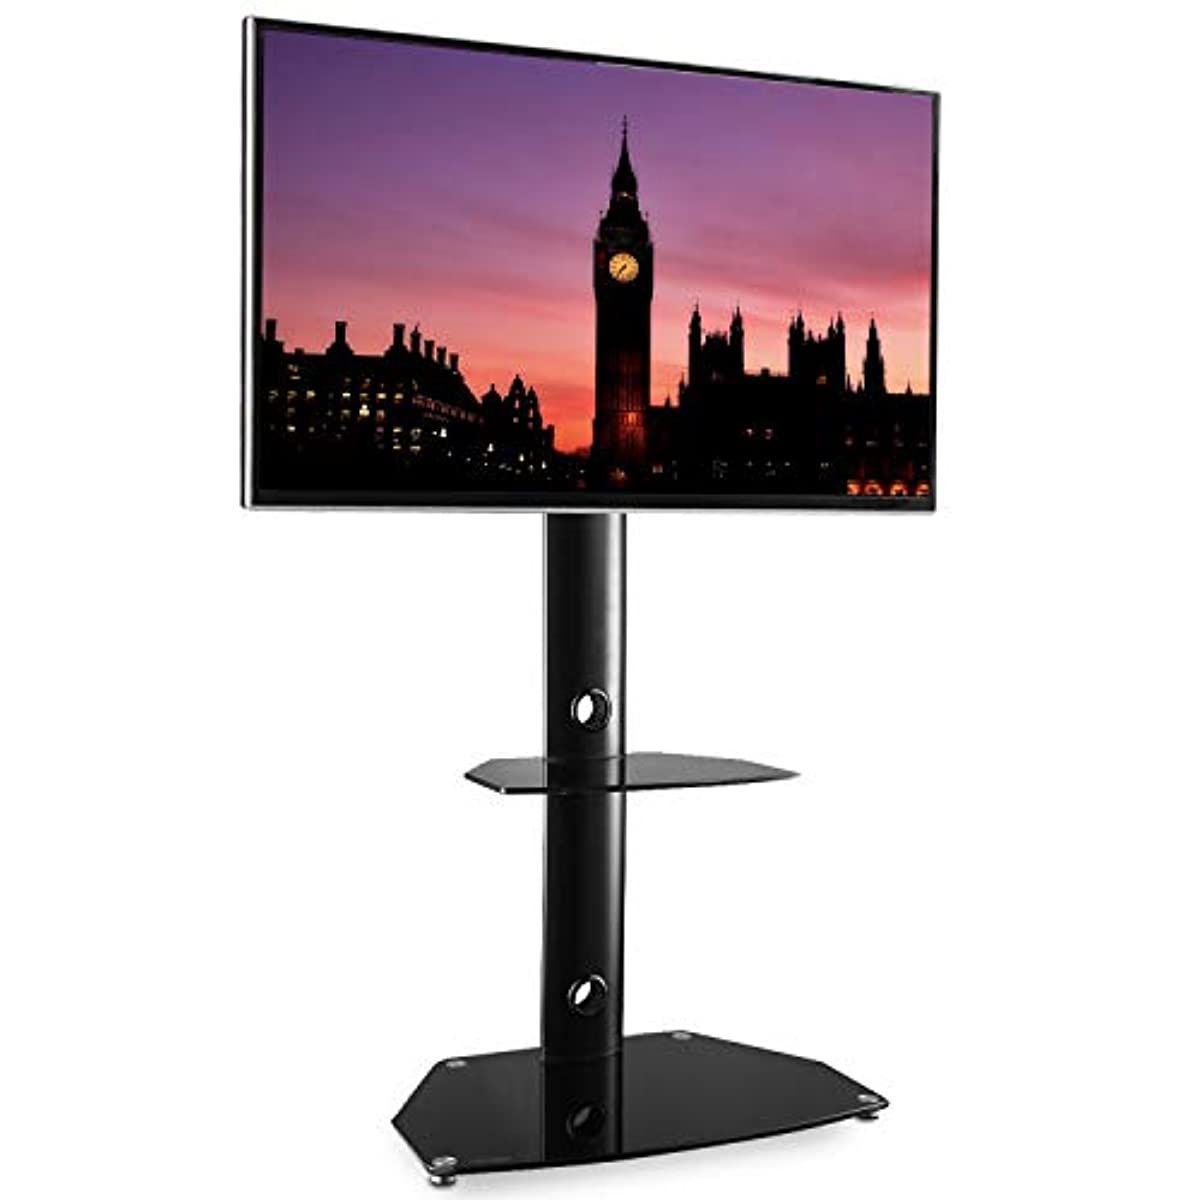 Rfiver Universal Floor Tv Stands Base Swivel Mount With Height Adjustable Cable Management Intended For Well Known Floor Corner 3 In 1 Tv Stand Media Towers Monitor 27 To  (View 3 of 10)